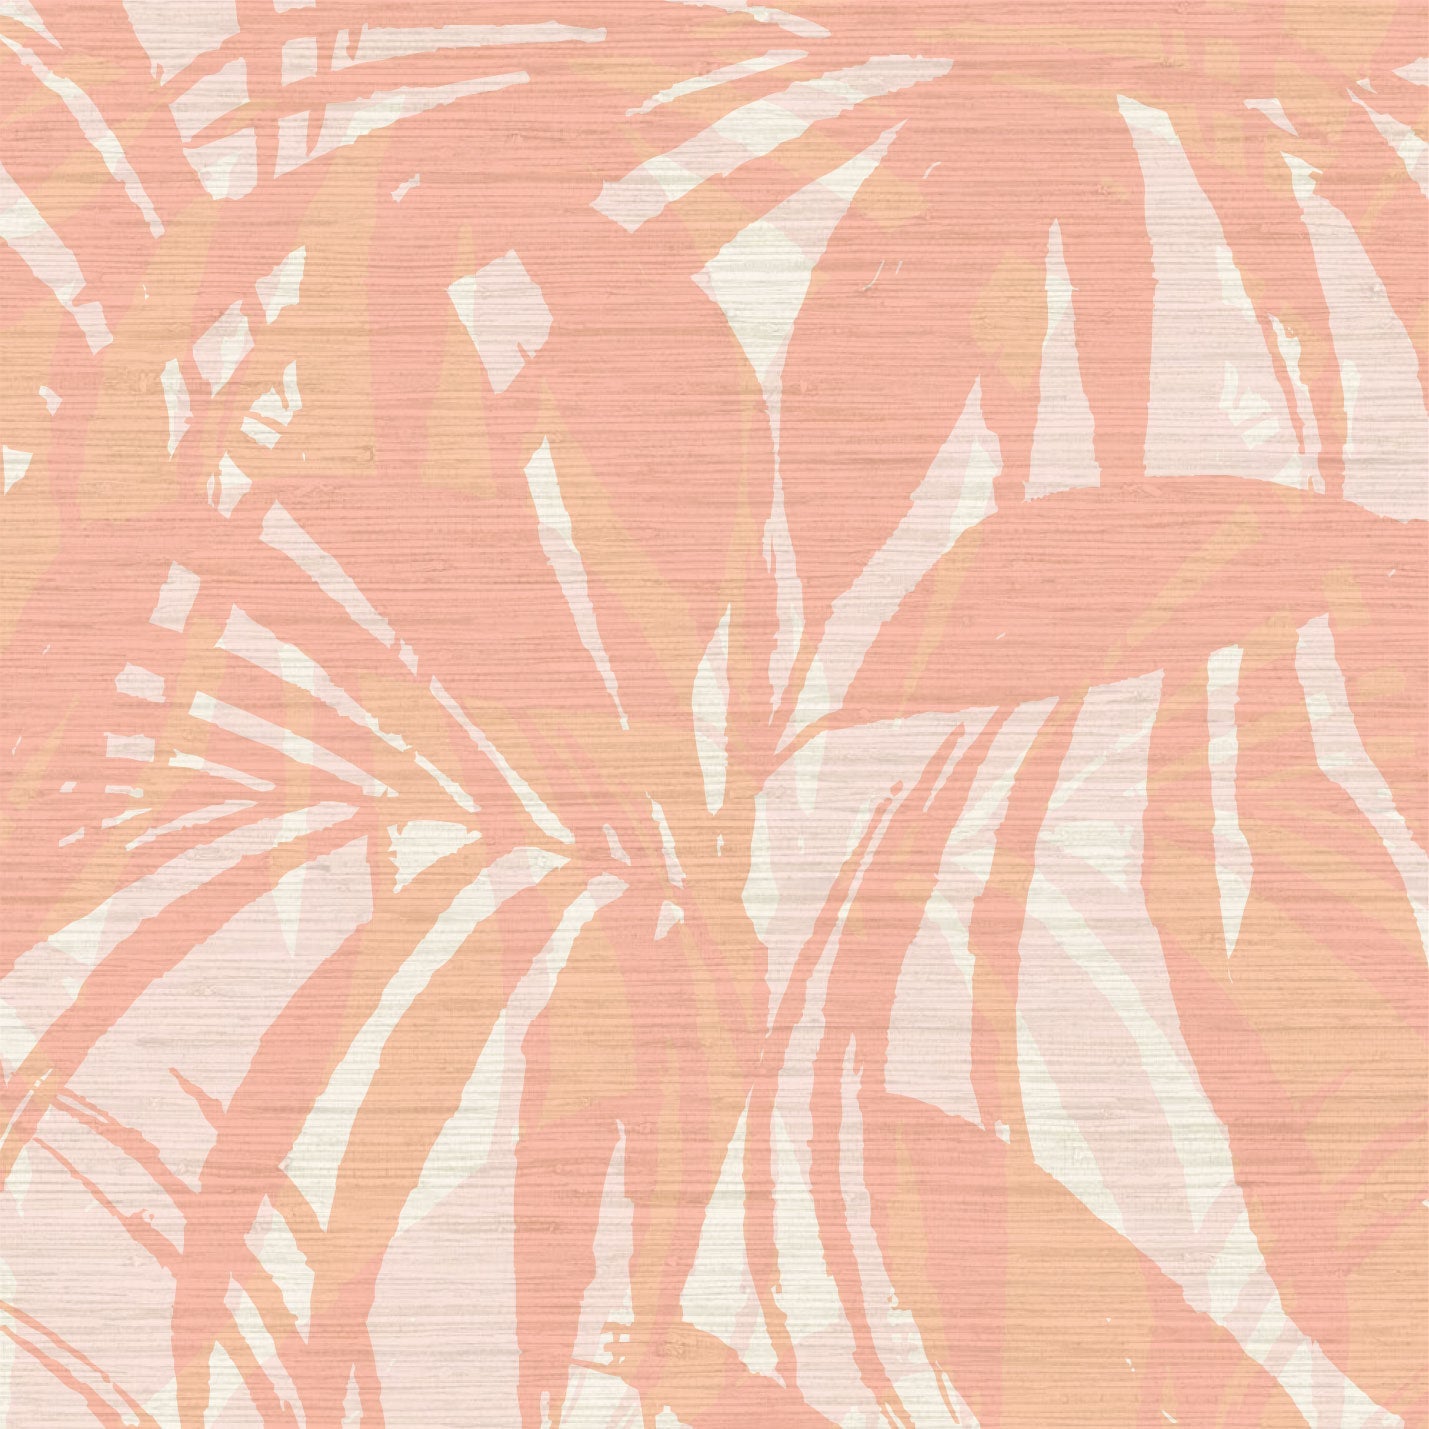 Printed grasscloth wallpaper with oversized 2 color overlapping palm leaf